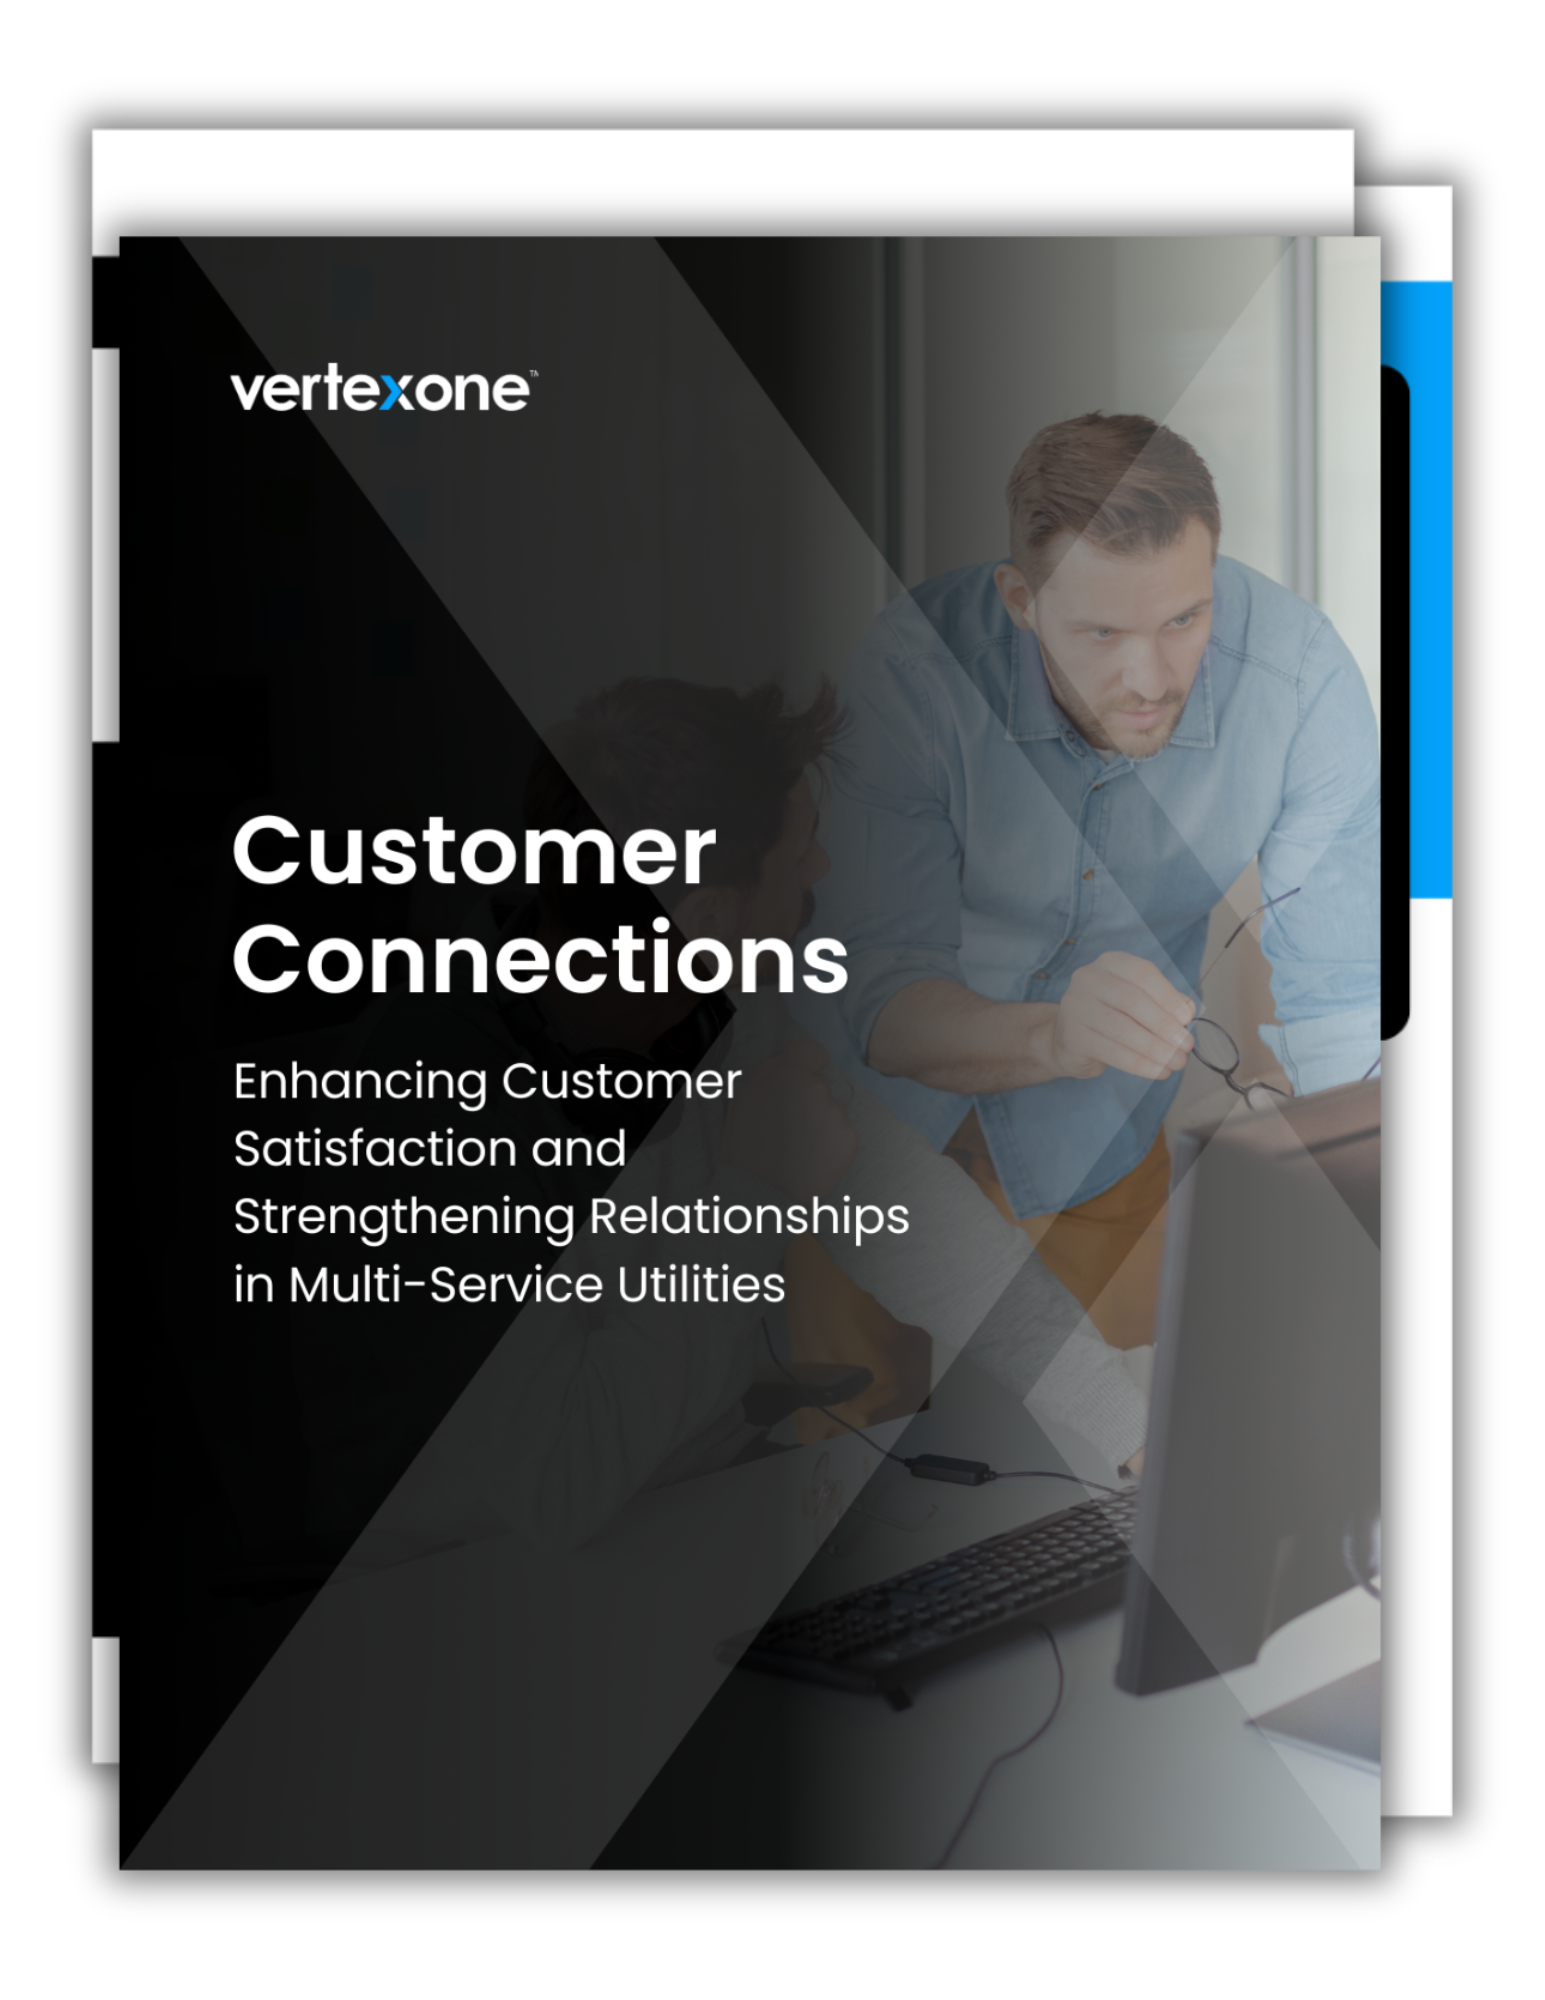 Thumbnail - Customer Connections Enhancing Customer Satisfaction and Strengthening Relationships in Water Utilities